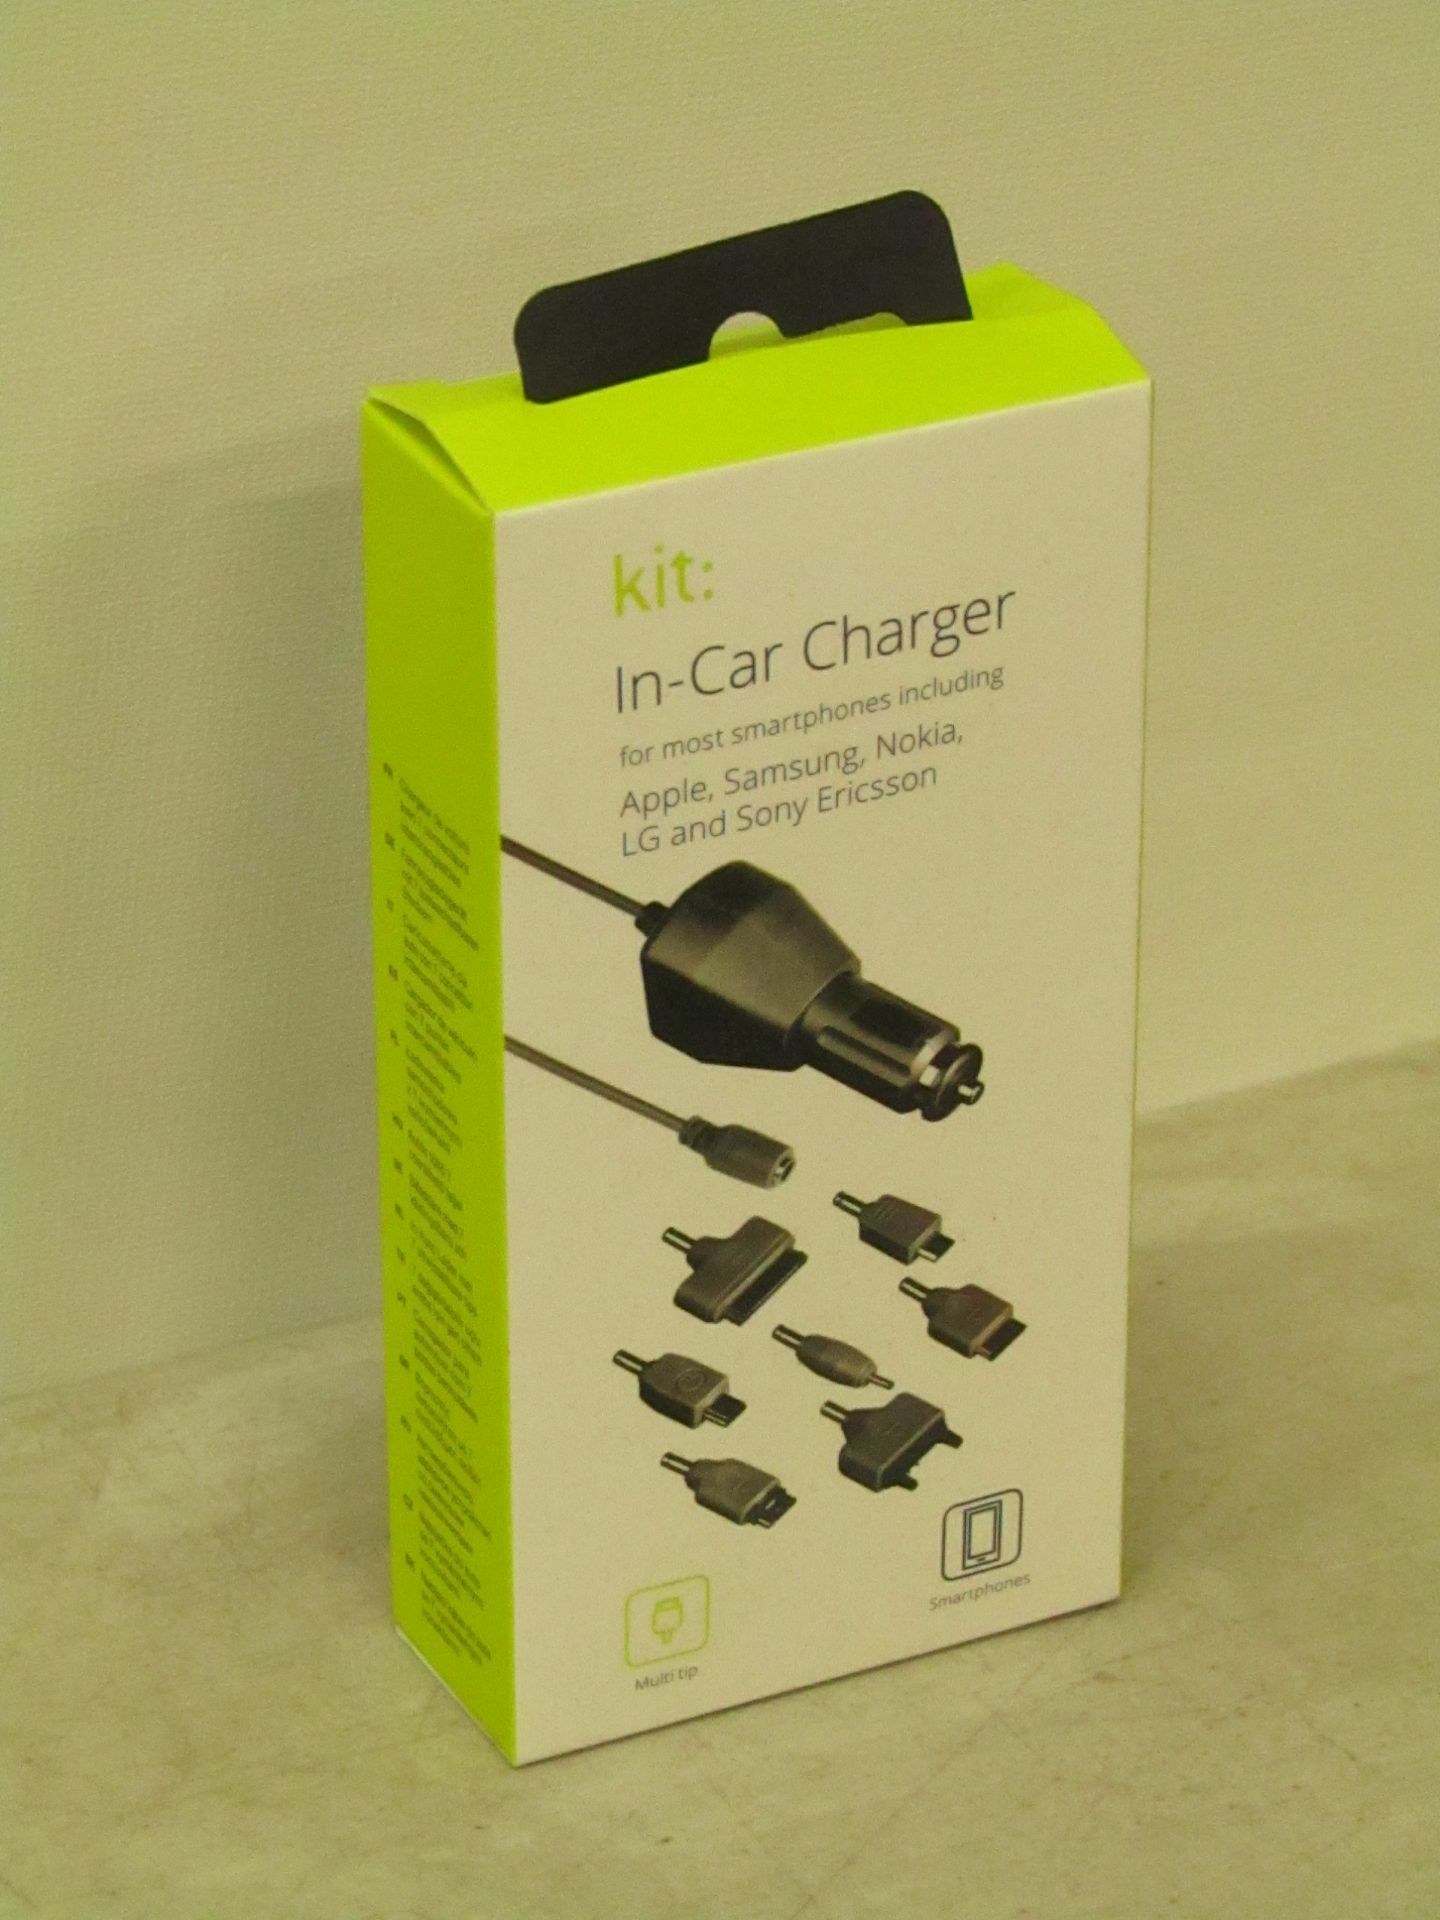 10x KIT In Car Charger Kit with Multiple Tips for different Phone brands, new and boxed